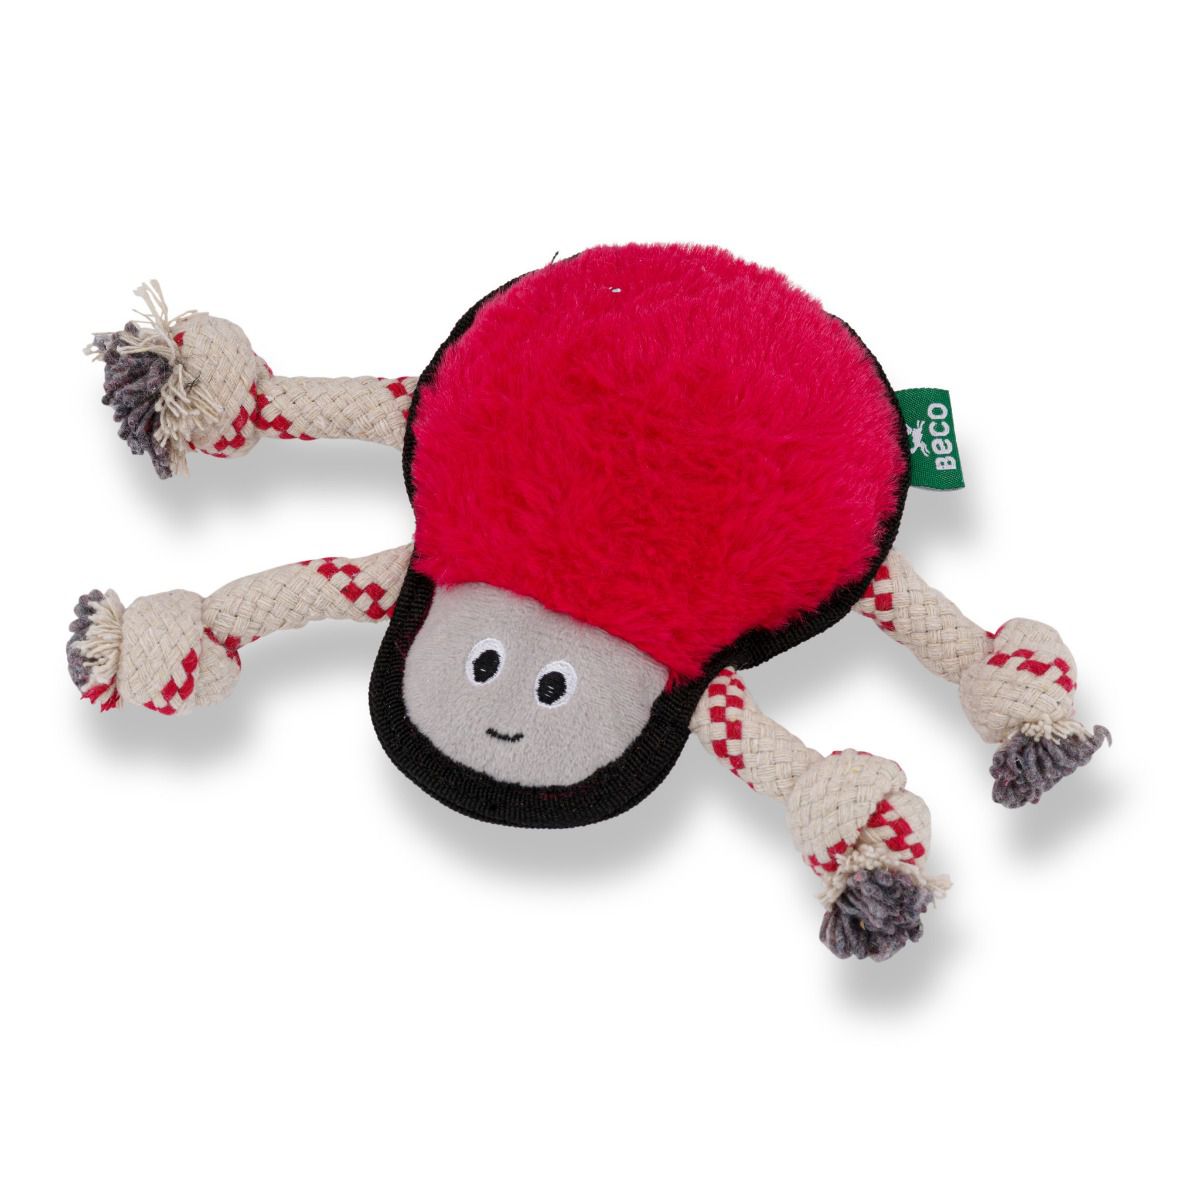 Afbeelding Knuffel Hond – Beco Plush Toy Spider